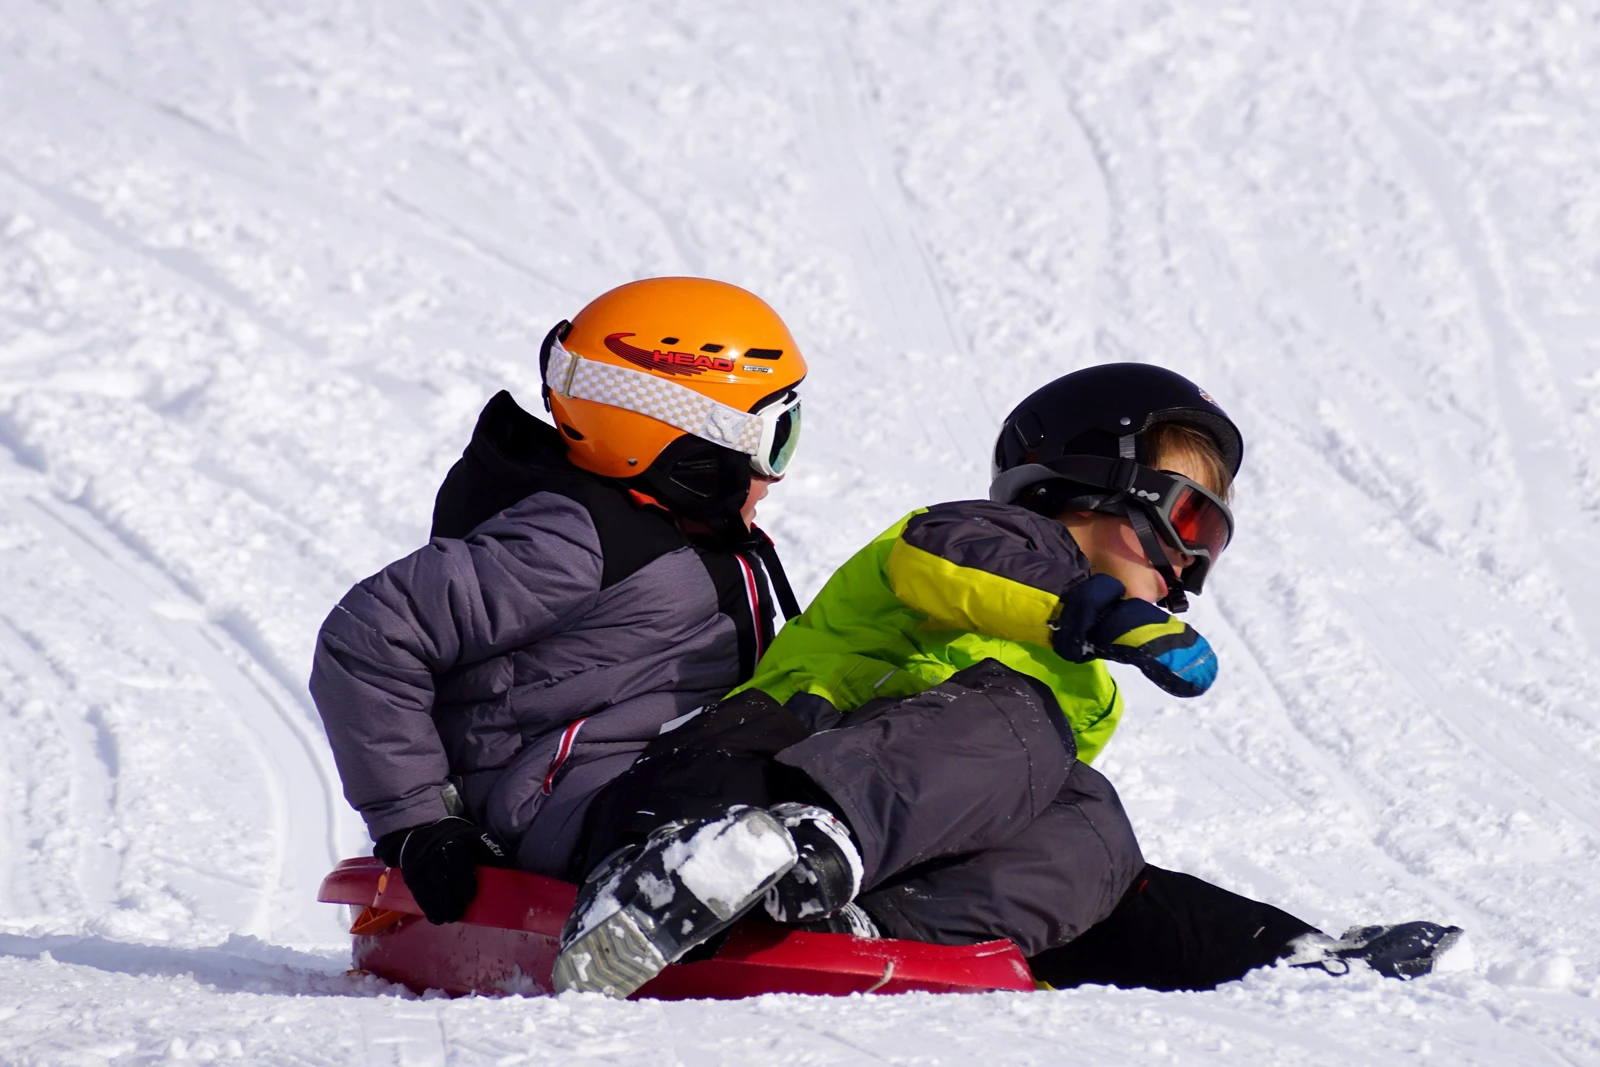 Two children on a sledge going down a snowy slope